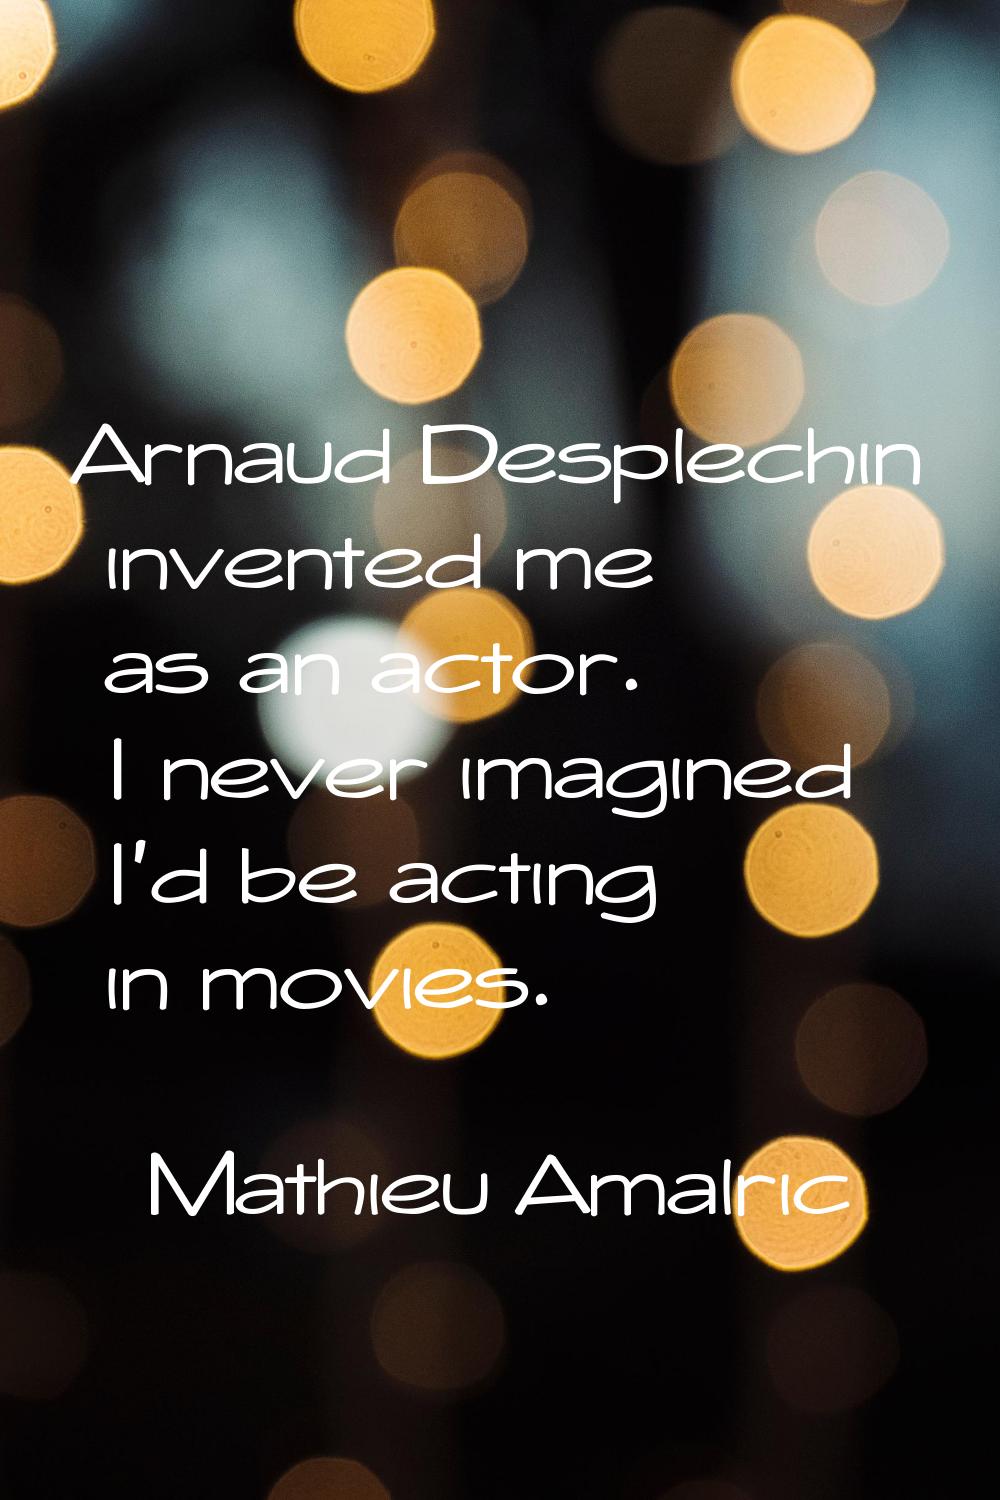 Arnaud Desplechin invented me as an actor. I never imagined I'd be acting in movies.